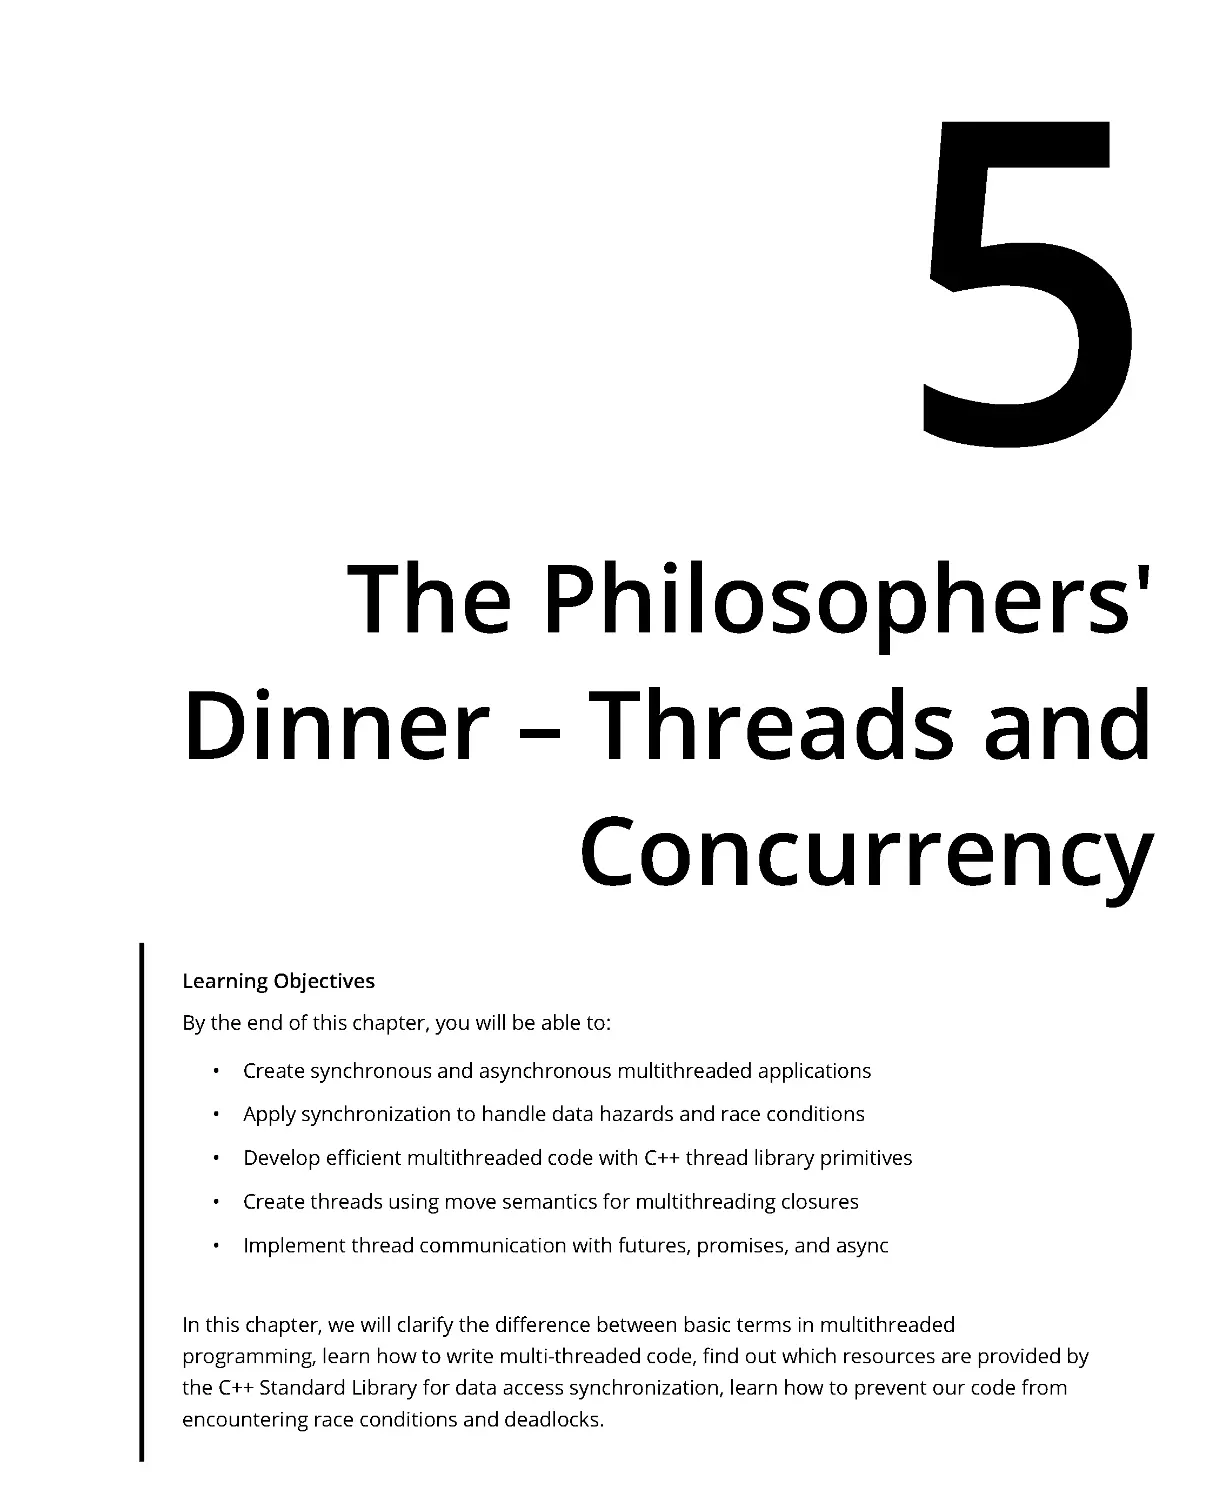 Chapter 5: The Philosophers' Dinner – Threads and Concurrency